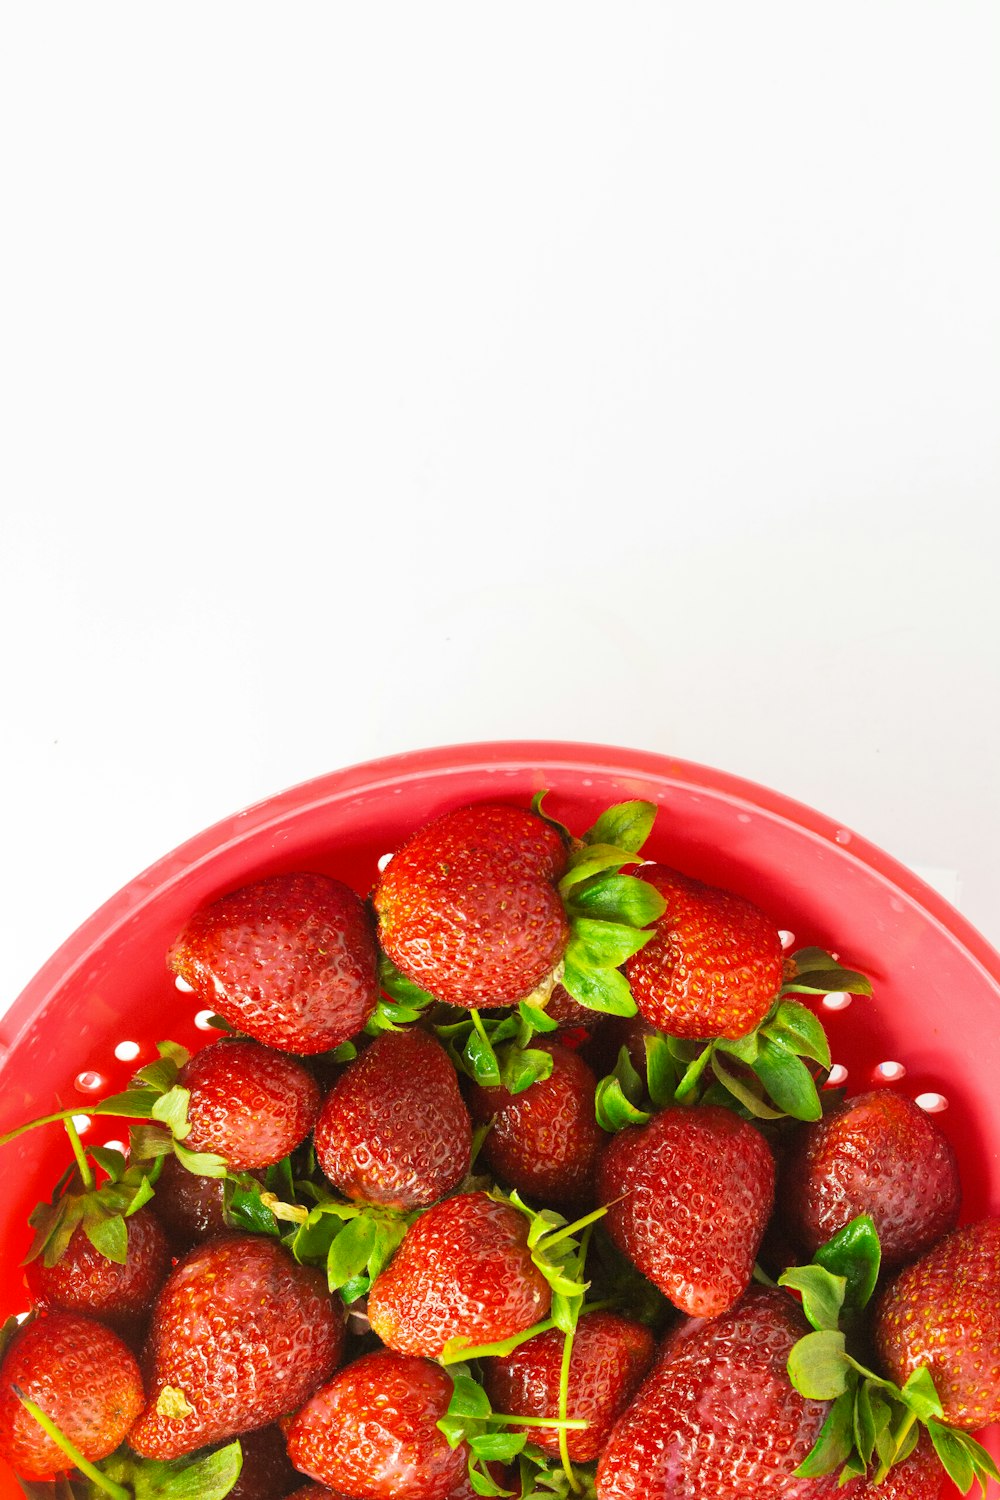 a red bowl filled with lots of ripe strawberries